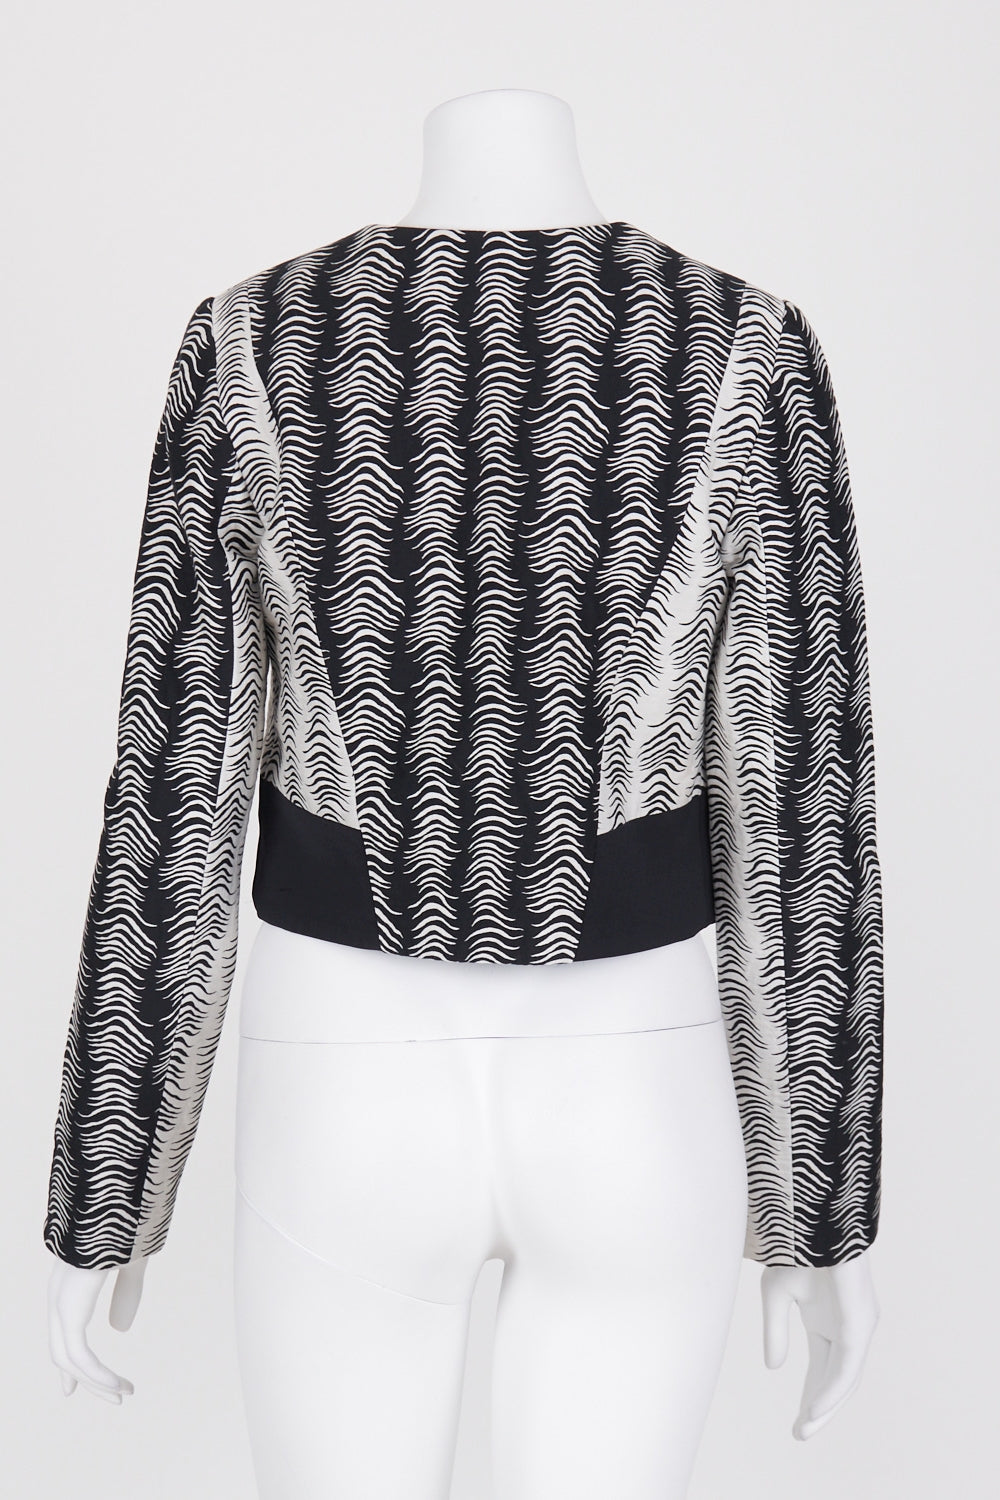 Cue Black And White Patterned Zip Front Jacket 8